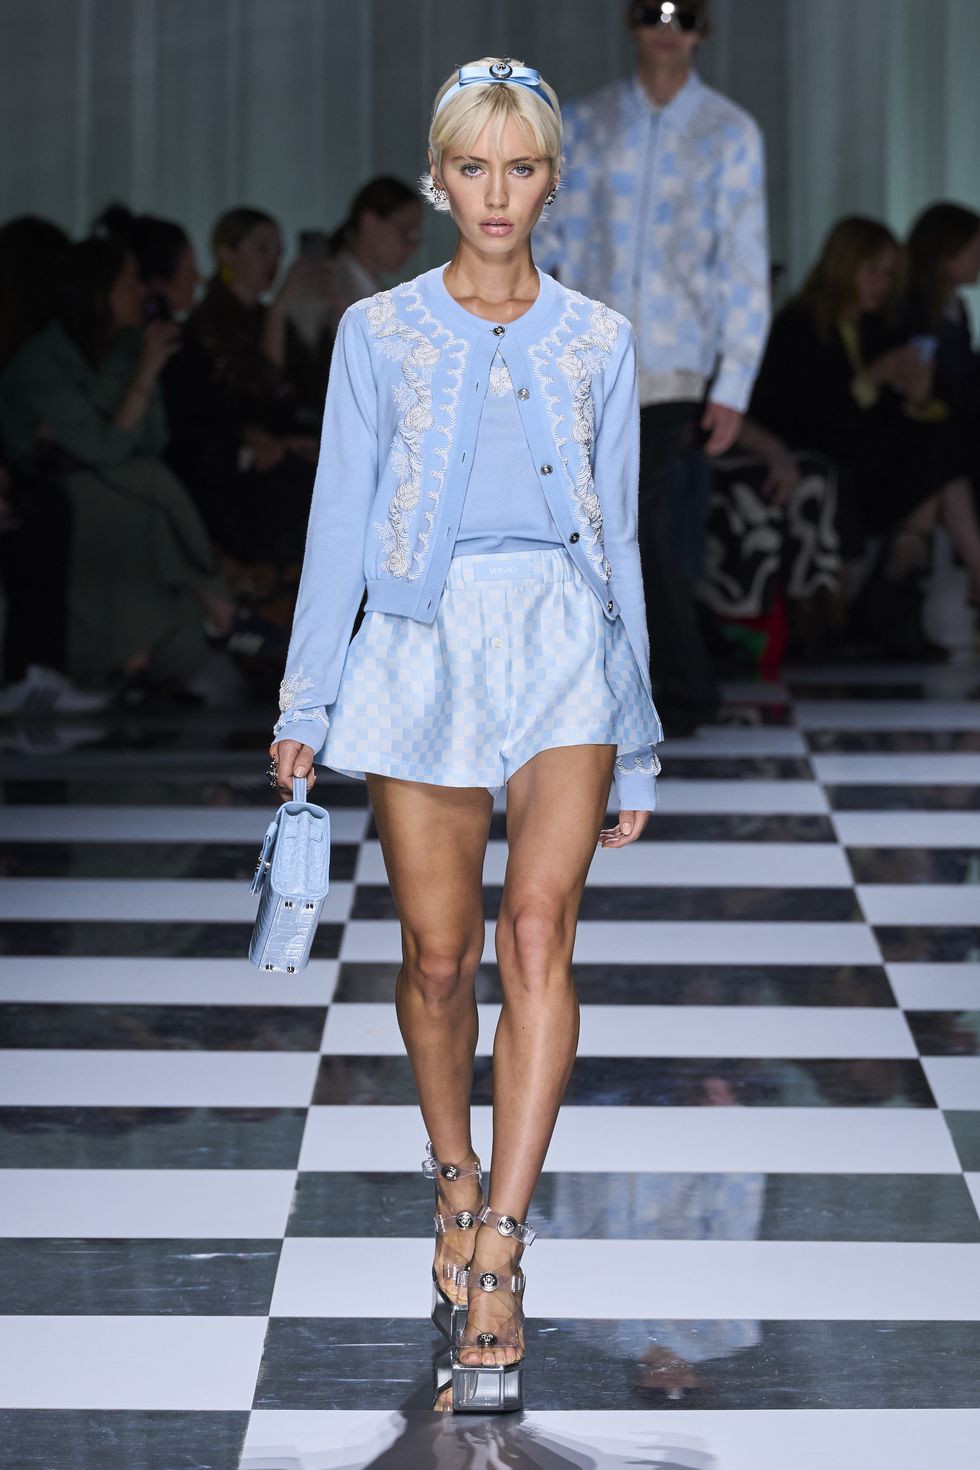 The Runway Rundown: From Gucci to Versace, Milan Fashion Week Day 3 Was ...